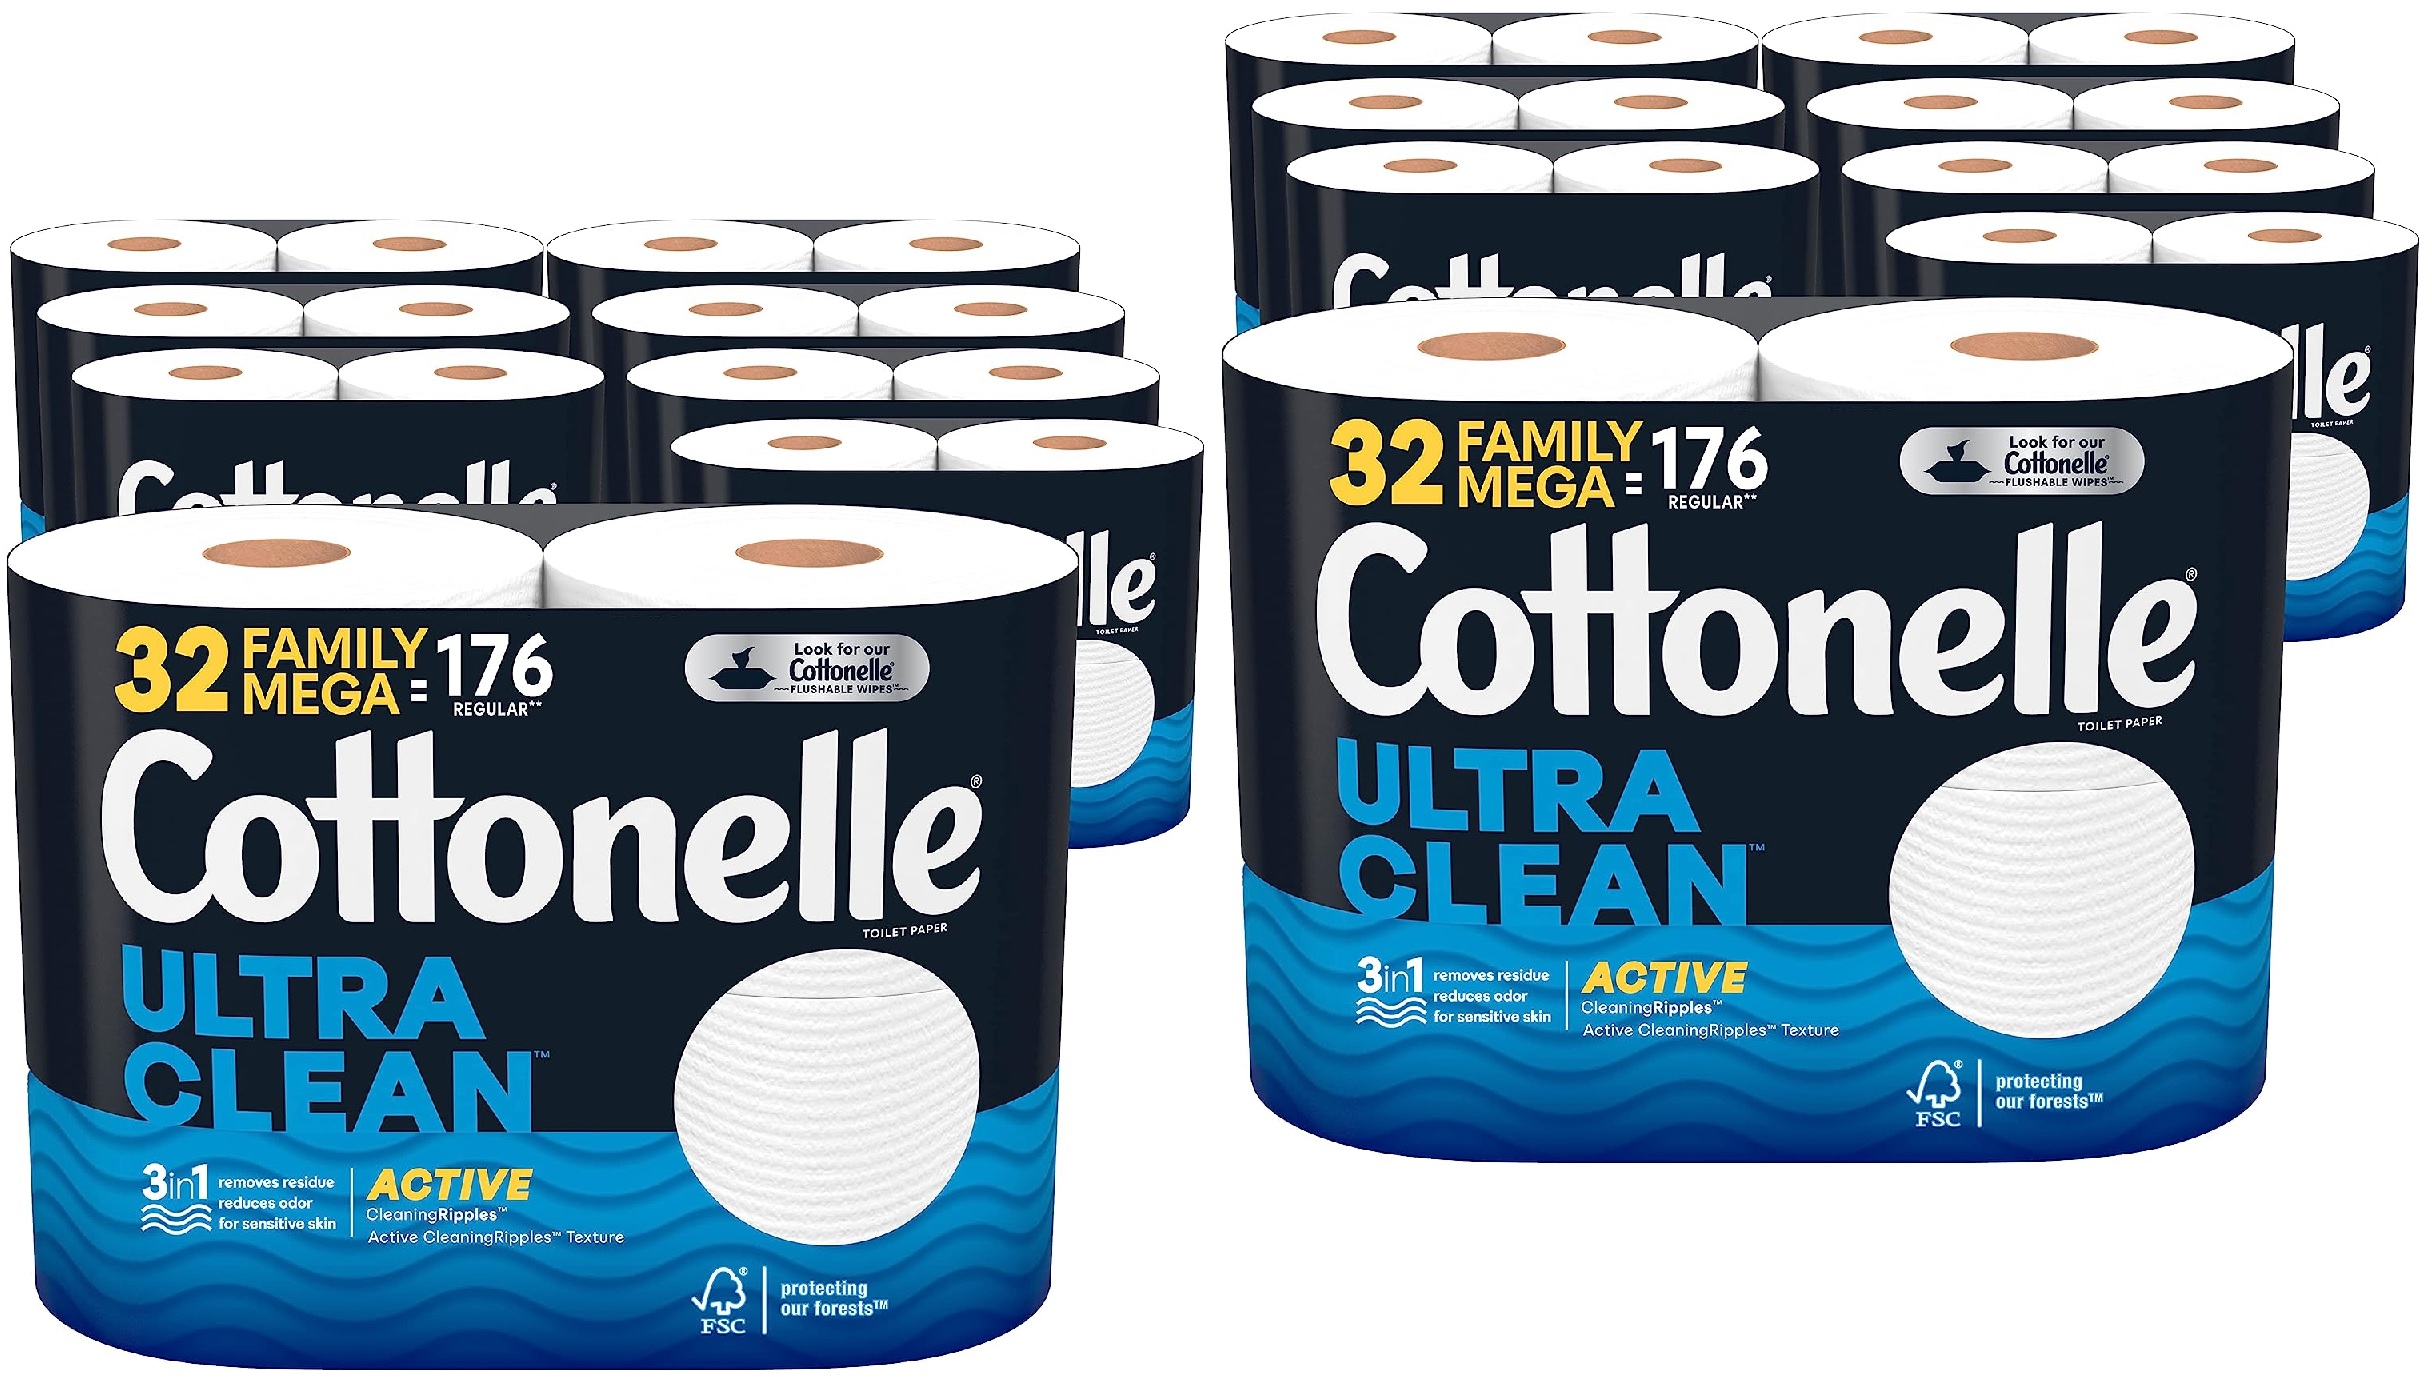 32-Count Cottonelle Family Mega Roll Toilet Paper (Ultra Clean or Ultra Comfort) + $15 Amazon Credit 2 for $55.50 w/ S&S + Free Shipping